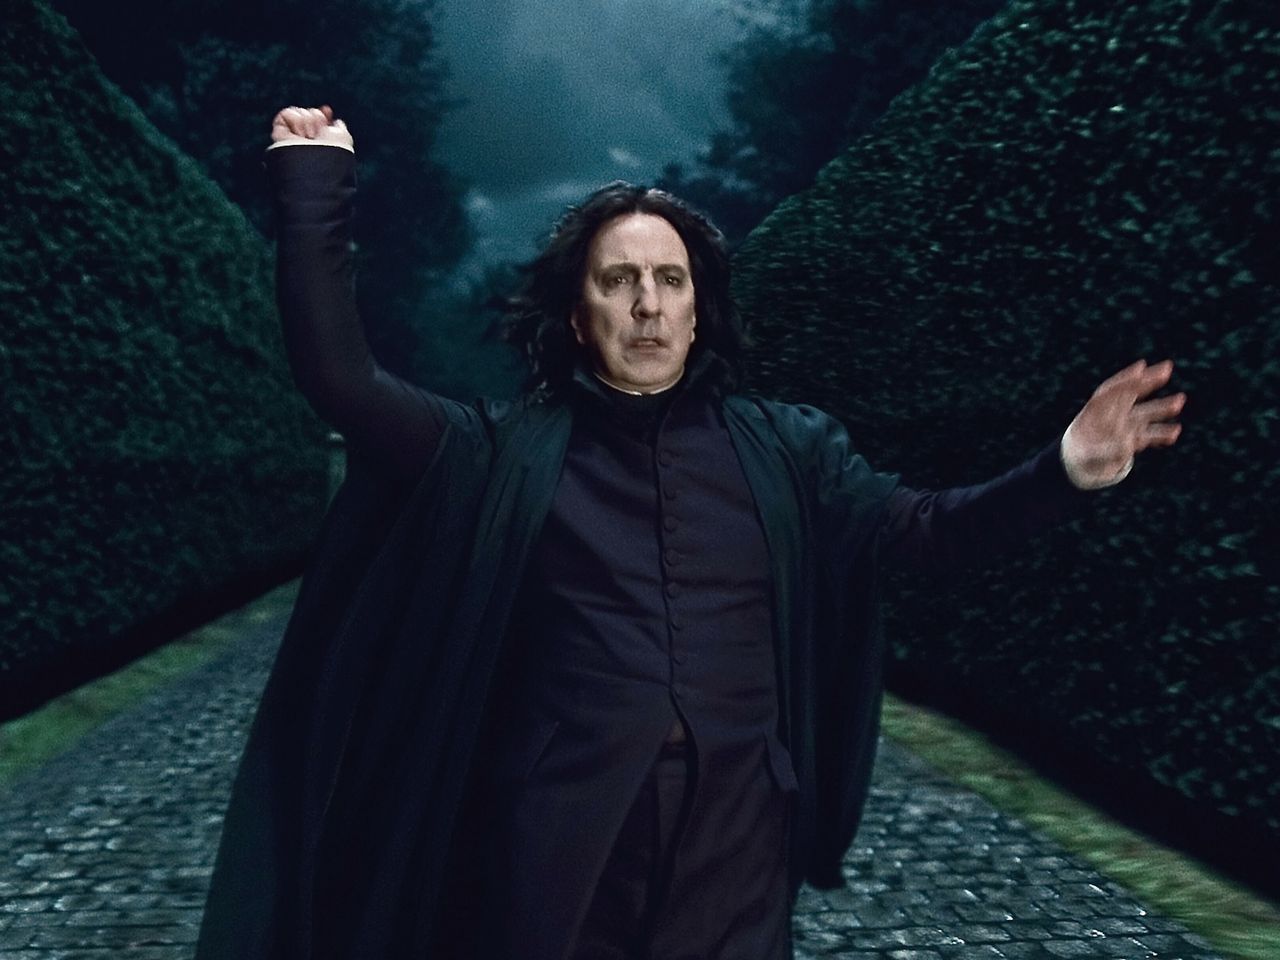 Thanks to his role as Snape, he will remain in the hearts of viewers forever.